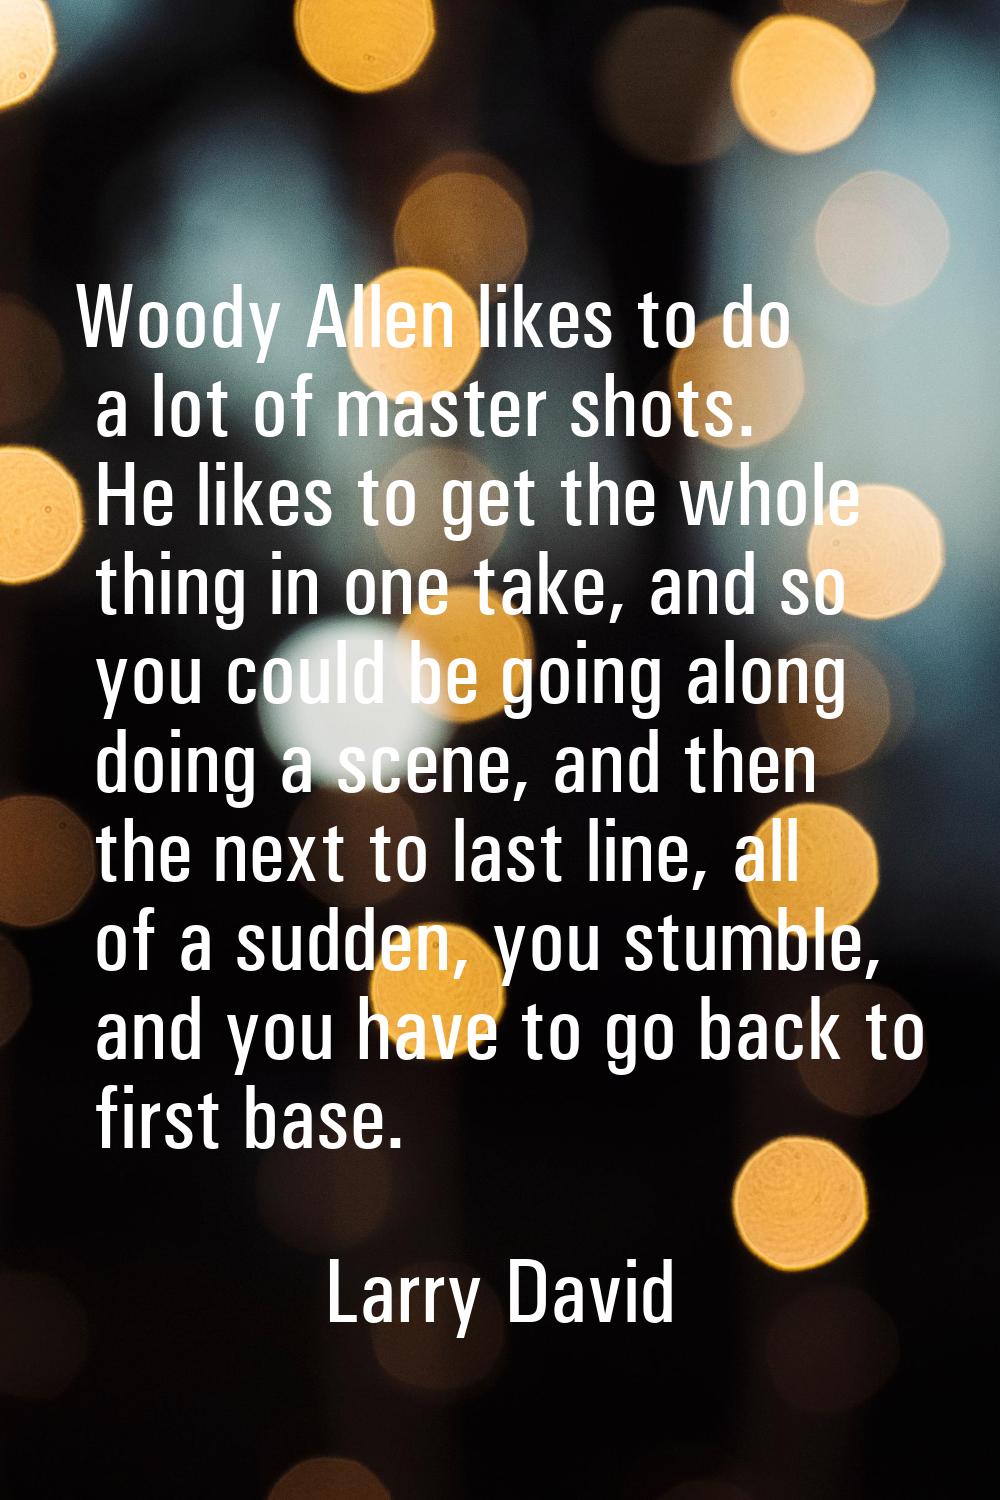 Woody Allen likes to do a lot of master shots. He likes to get the whole thing in one take, and so 